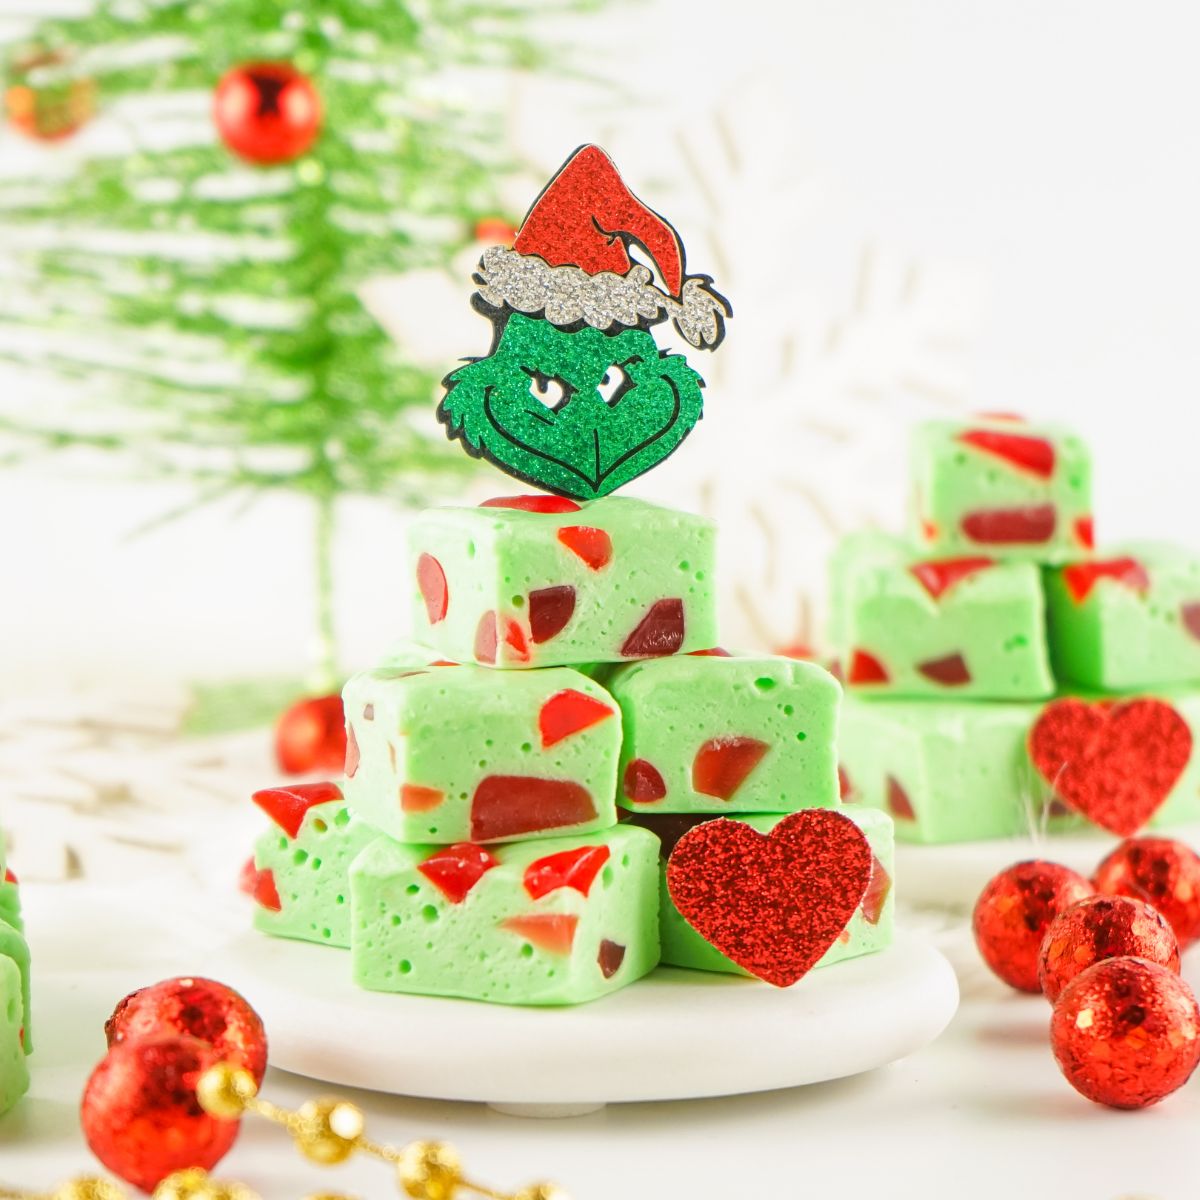 Grinch fudge squares on a plate with christmas decorations.